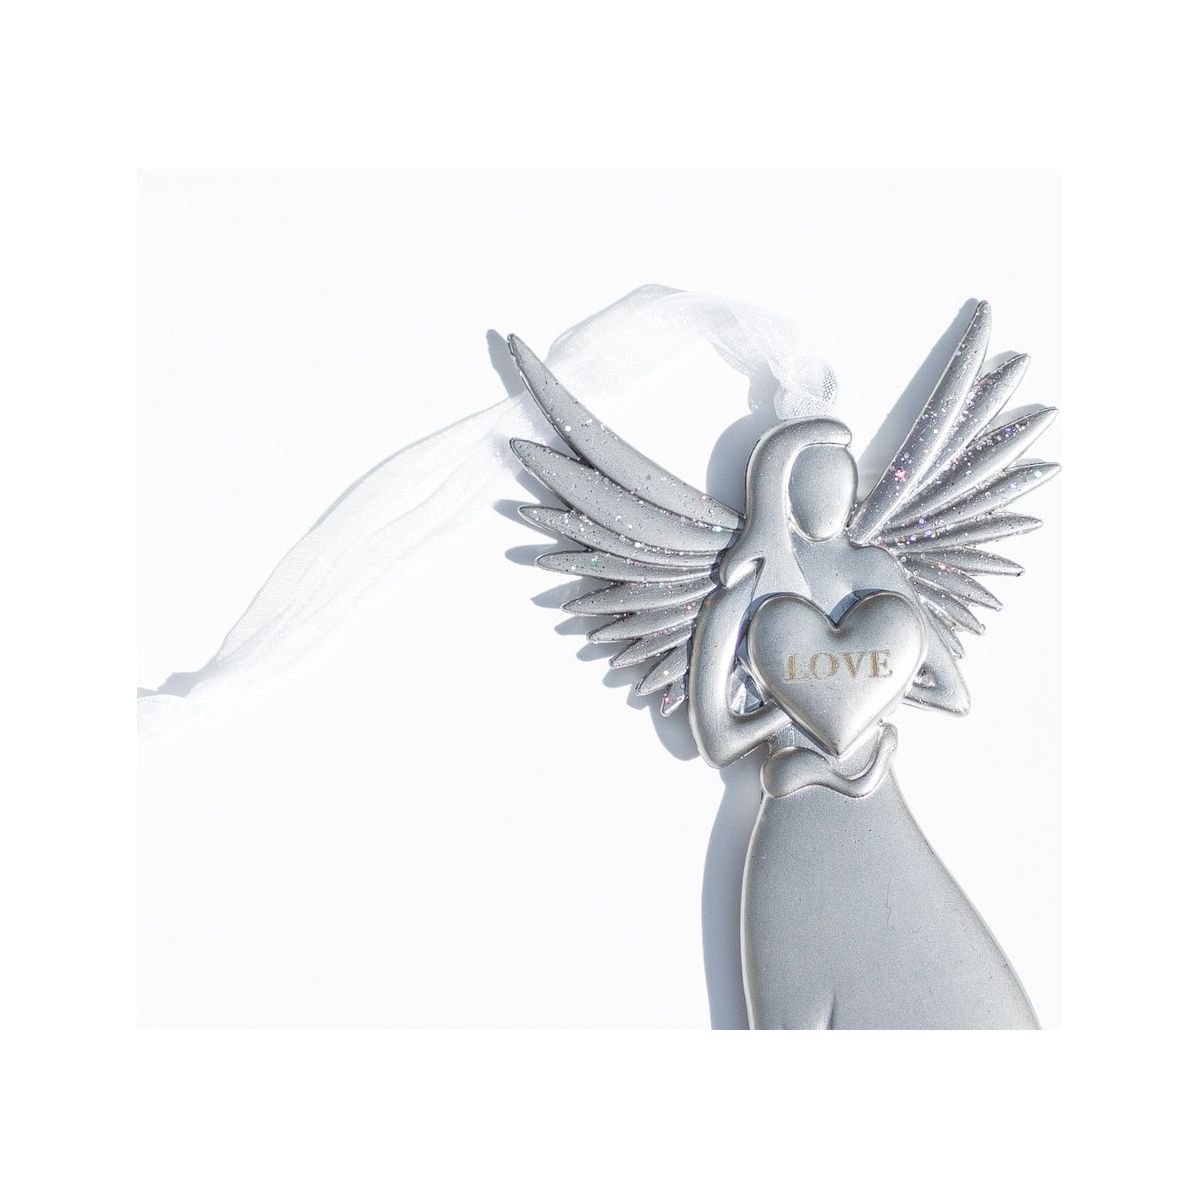 Detailed view of angel with sparkle wings holding a heart with the word &quot;LOVE&quot; engraved. Angel has white organza ribbon for hanging.